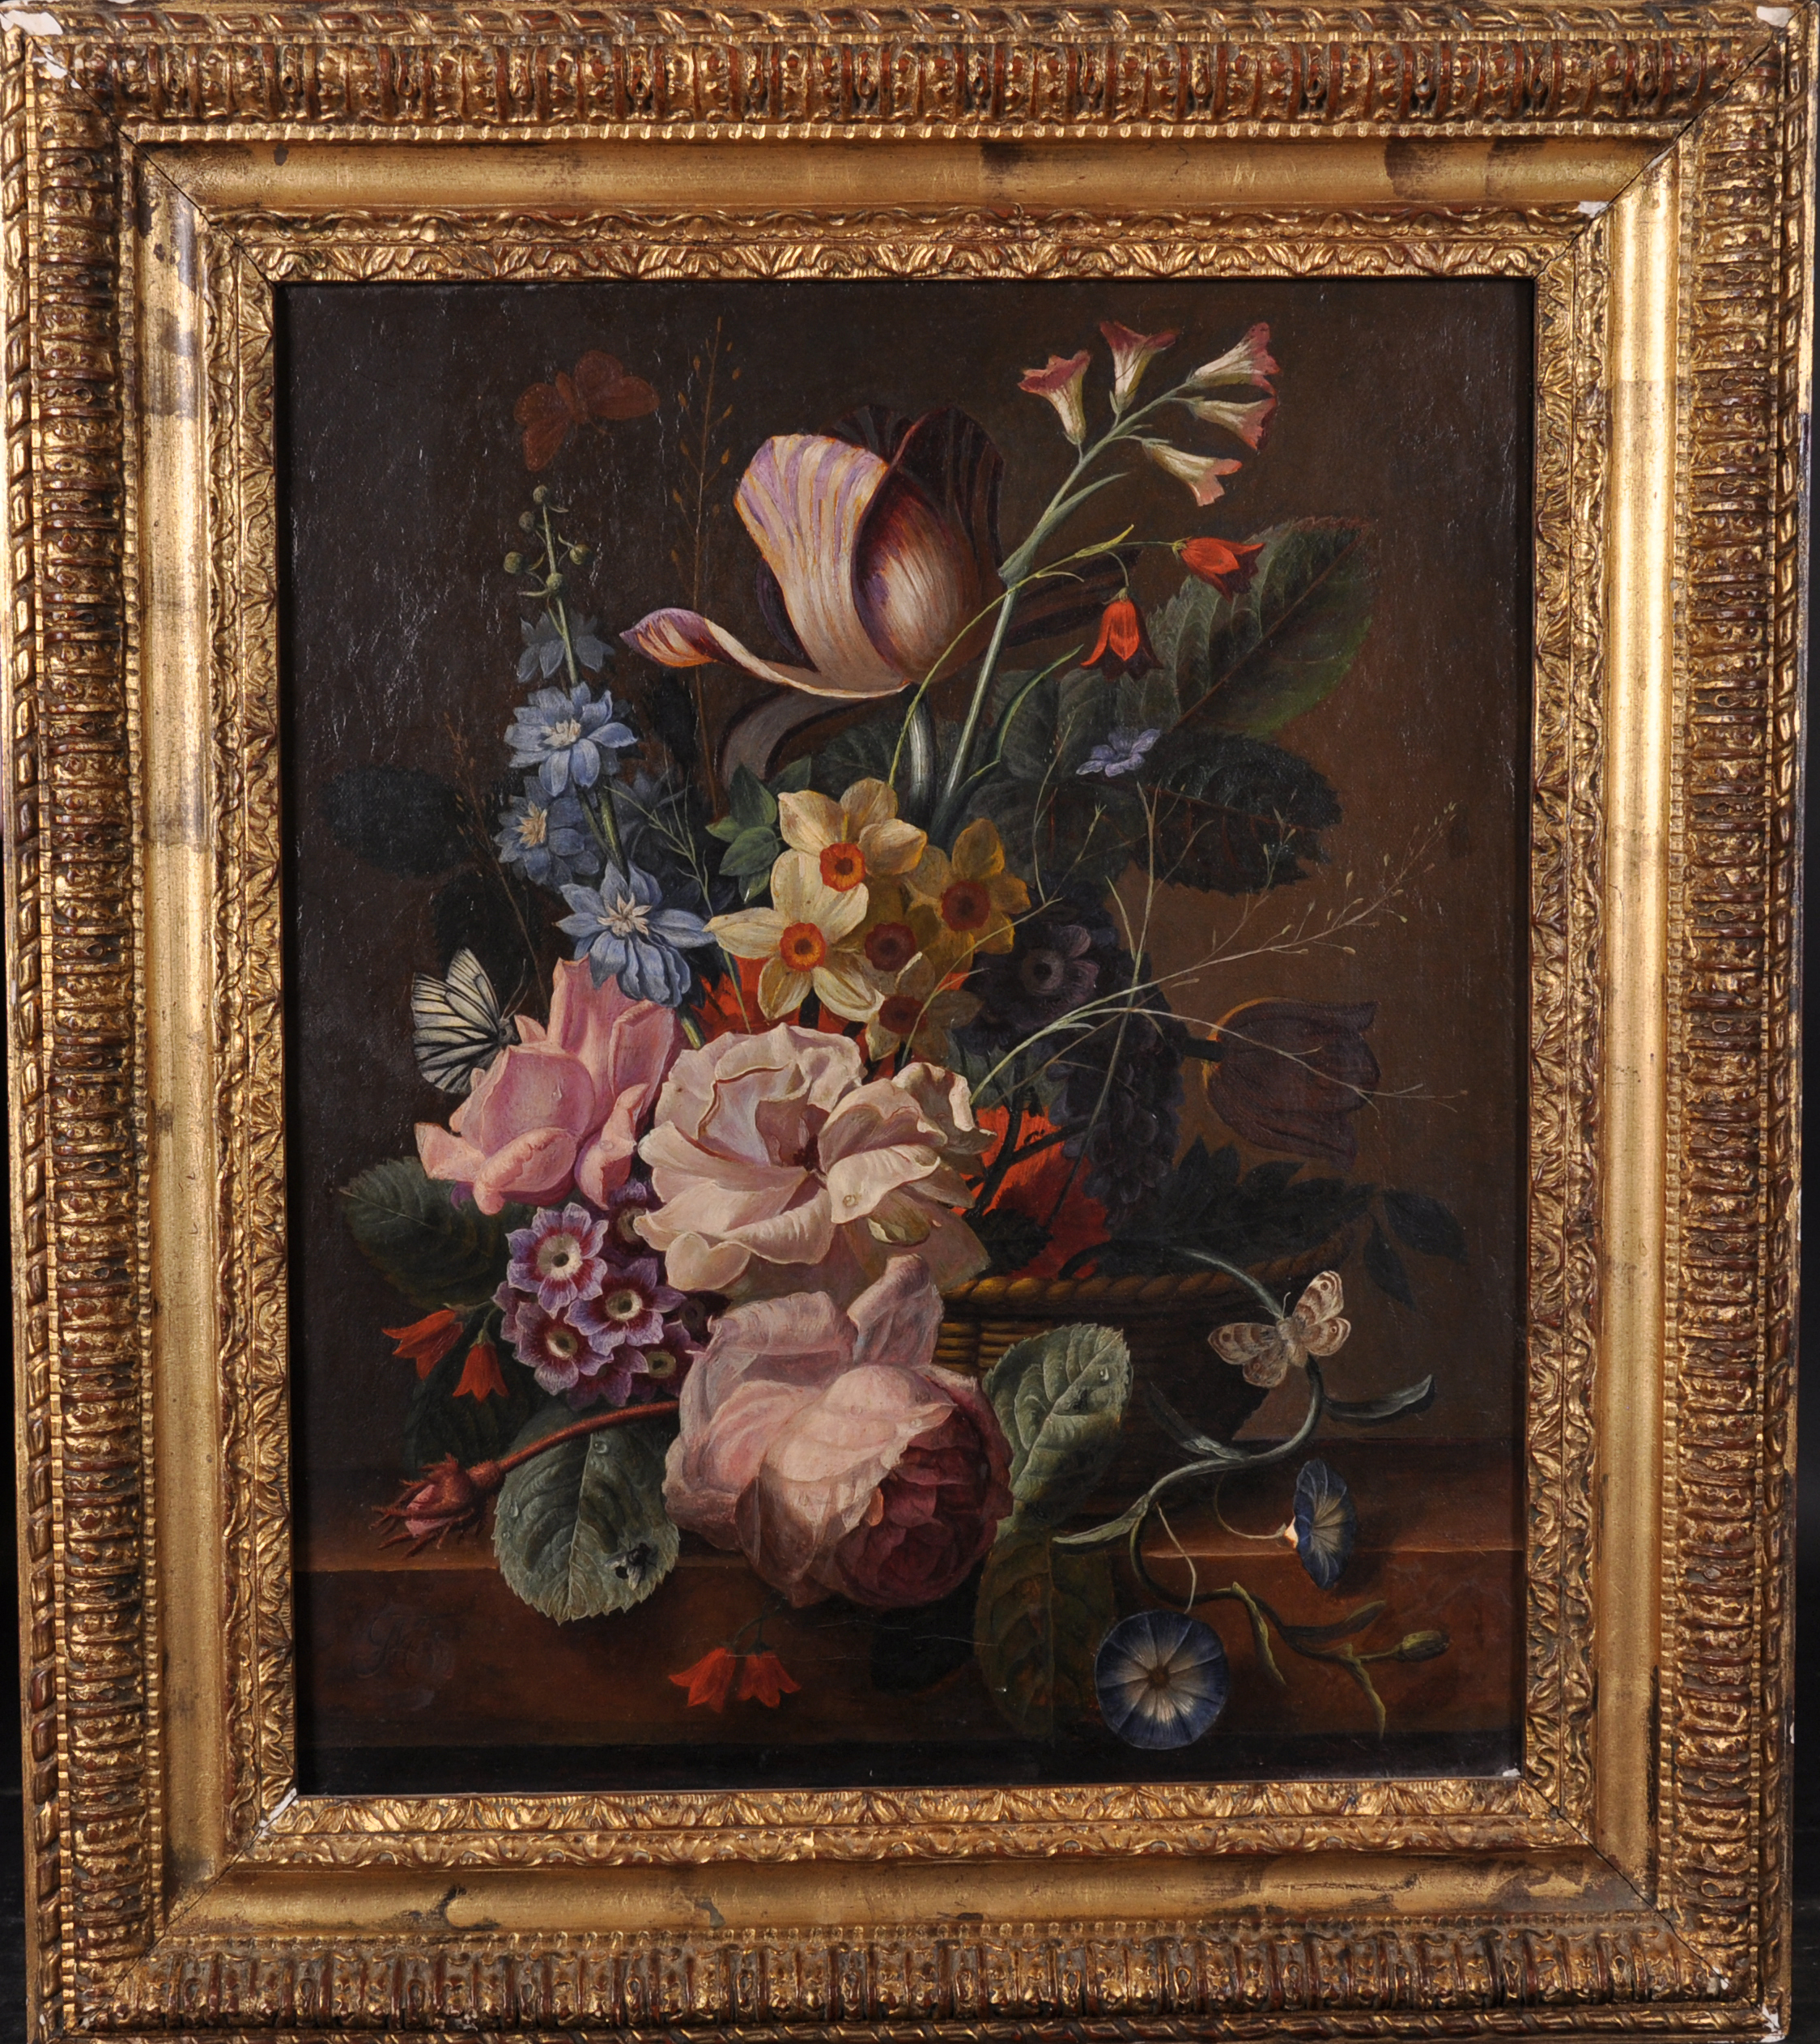 18th Century European School. A Still Life in a Wicker Basket, with a Butterfly, Oil on Canvas, - Image 2 of 5